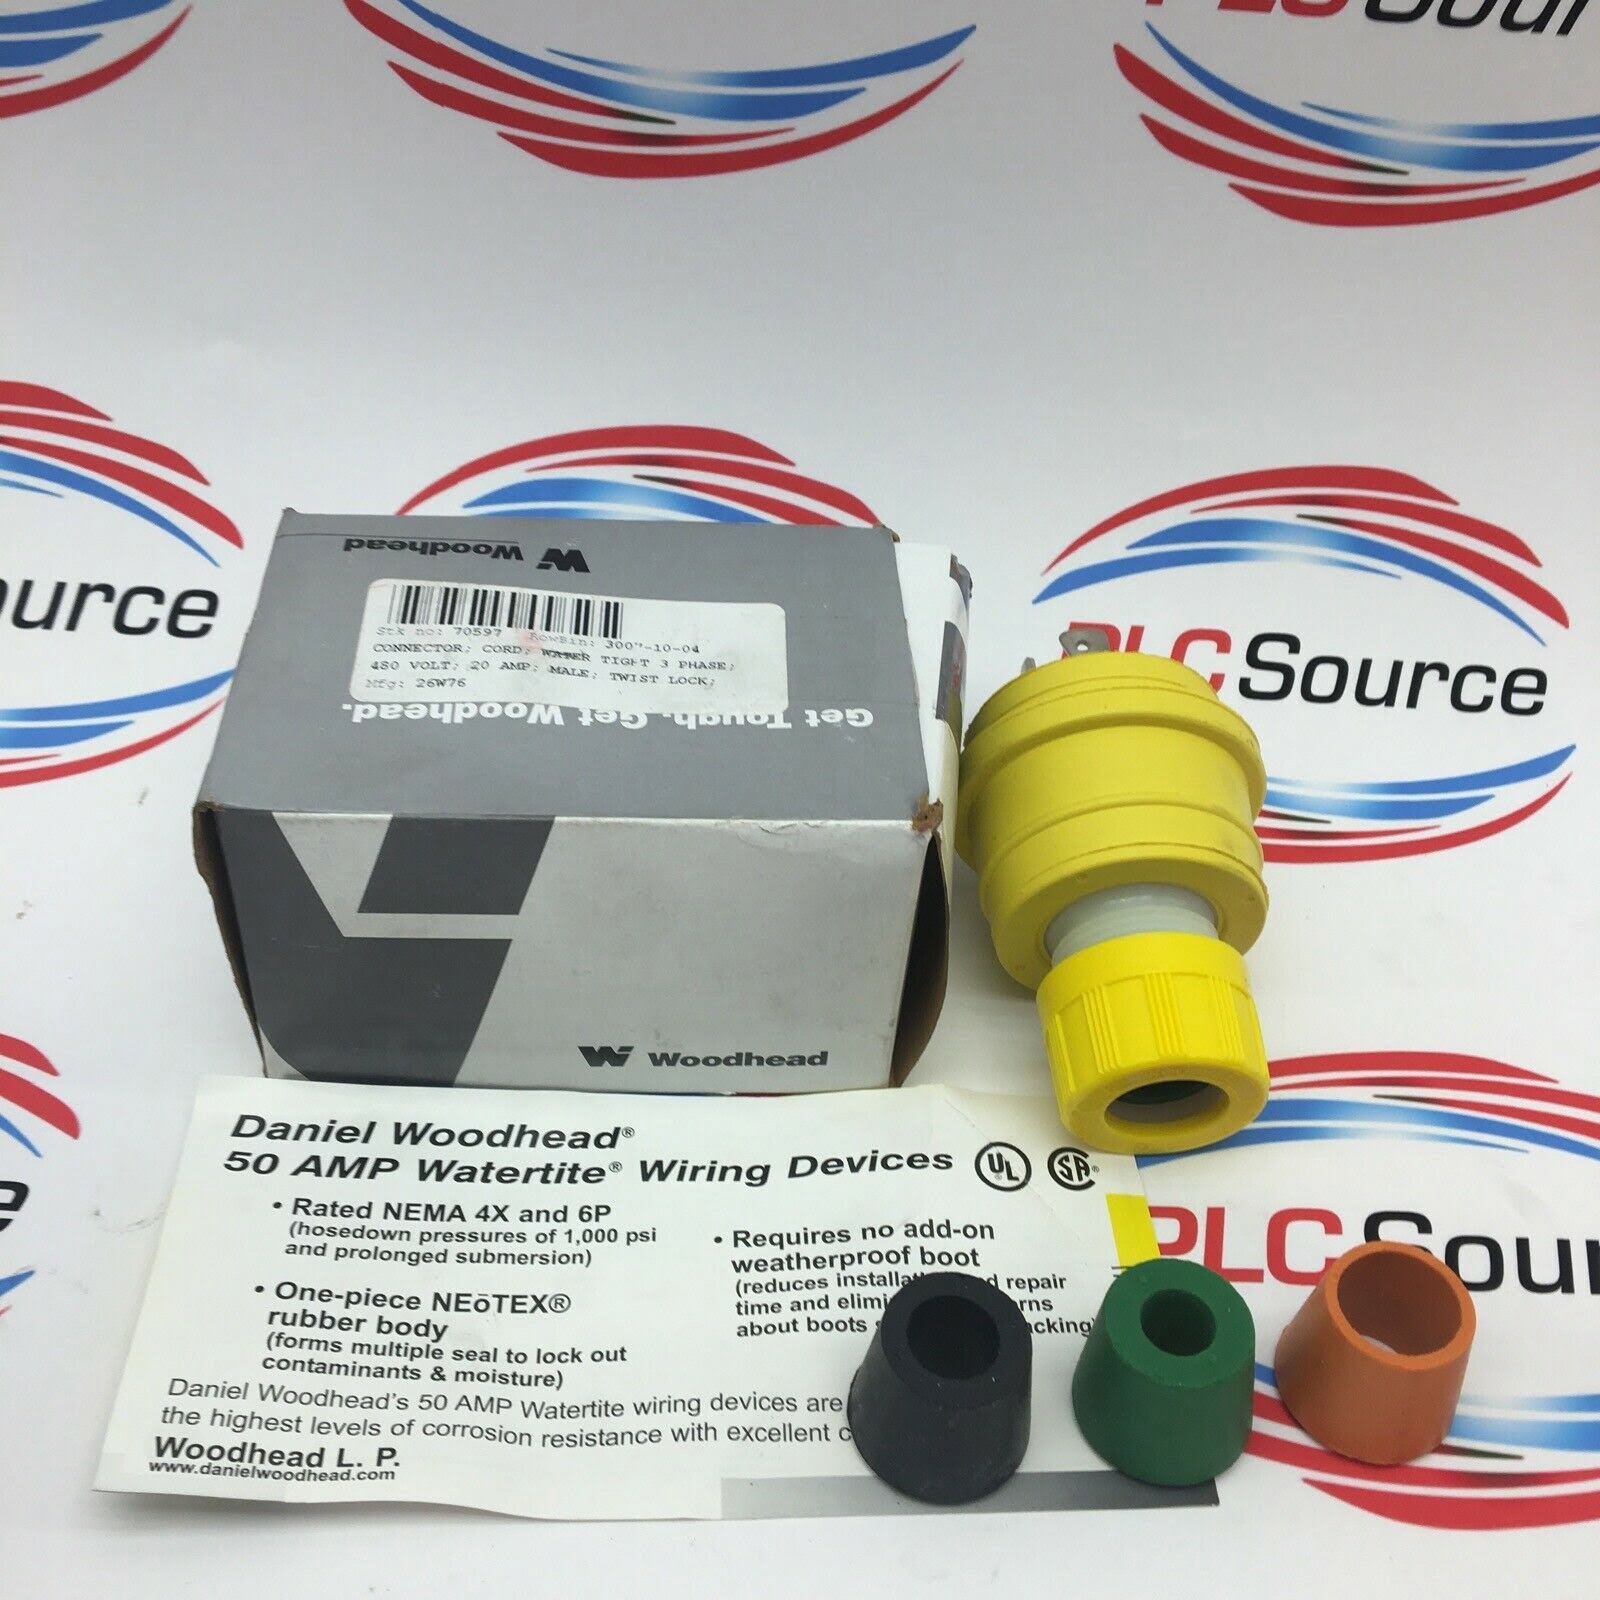 Yellow 3-Phase Woodhead 28W76 Watertite Wet Location Locking Blade Plug 30A Current 480V Voltage NEMA L16-30 Configuration 3 Poles 4 Wires 